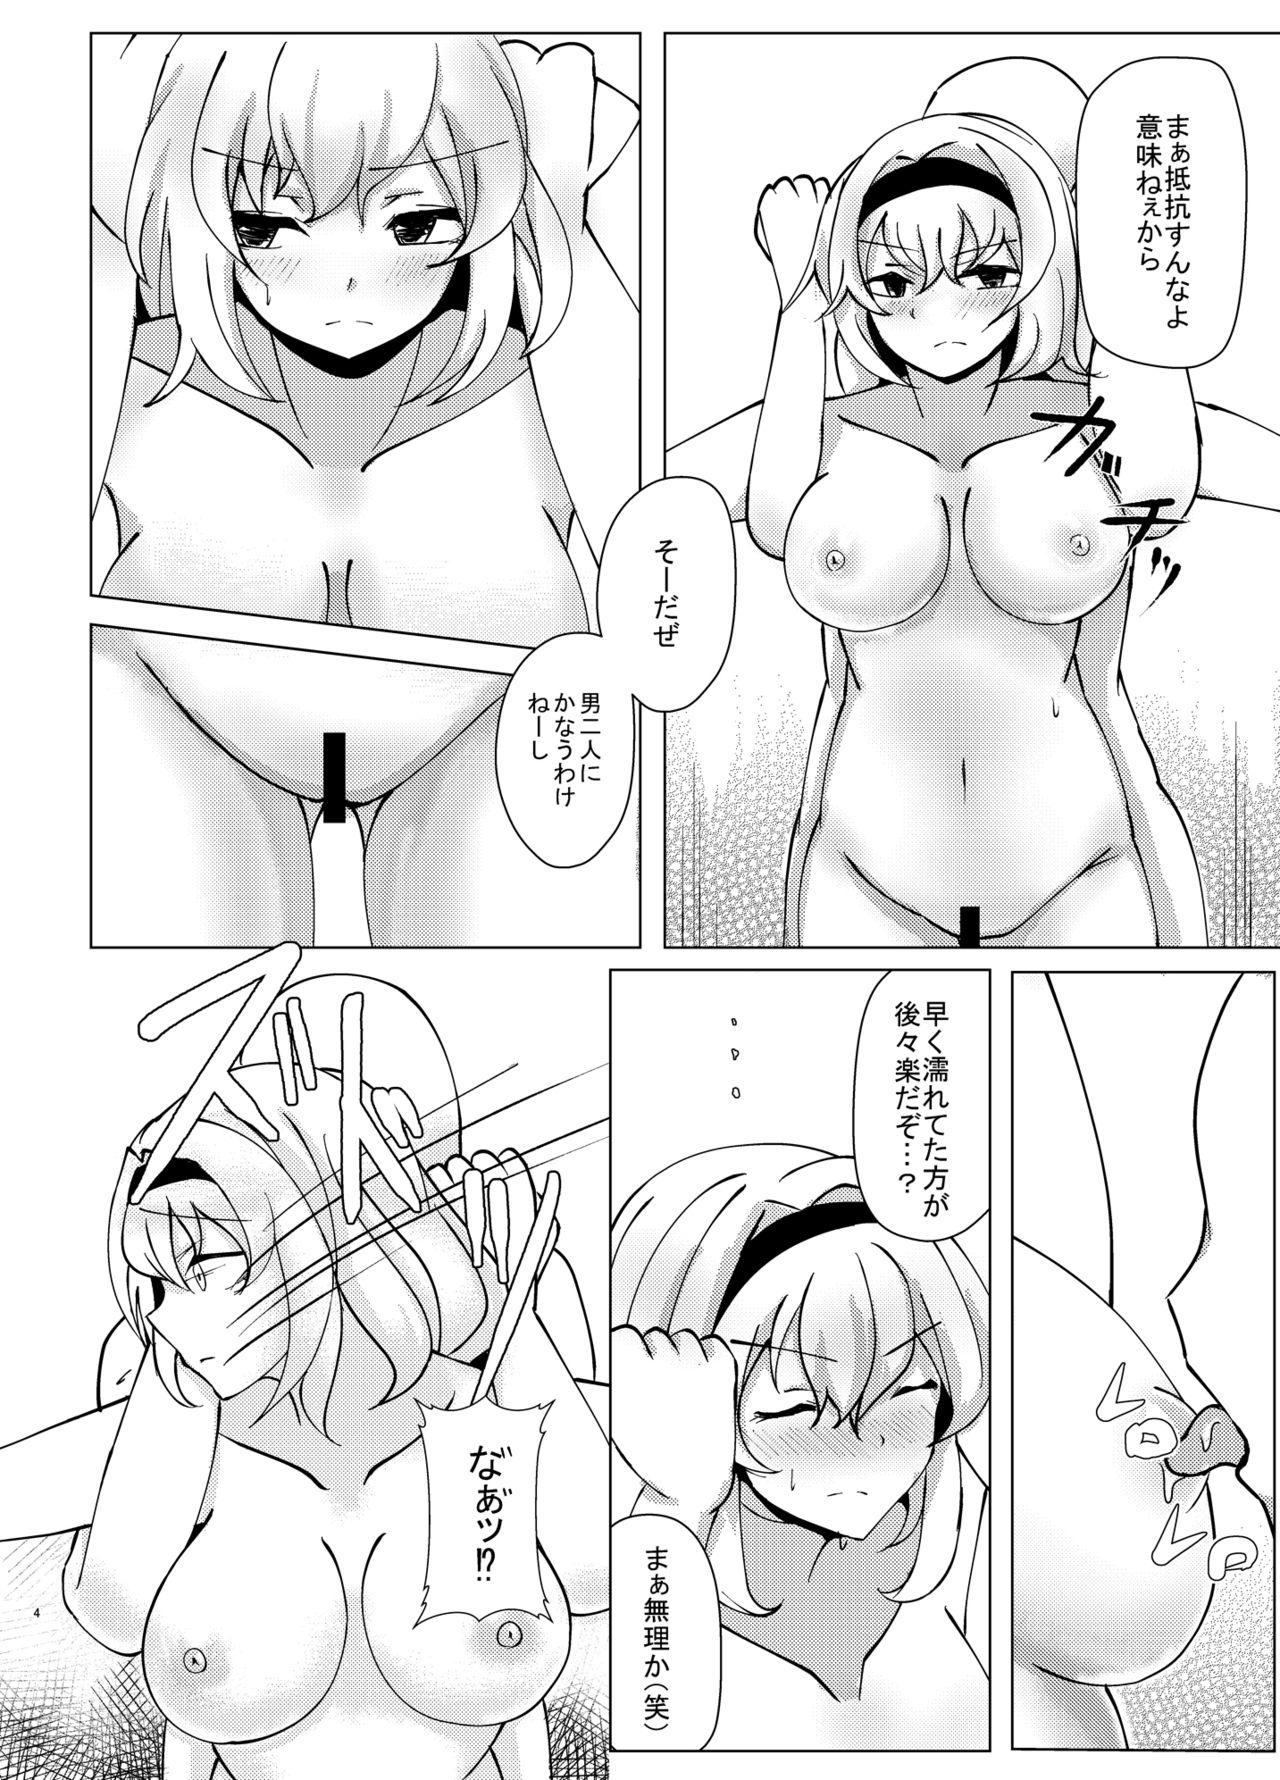 Girls Getting Fucked ー耐えたら何とかなる？ - Touhou project Latex - Page 4